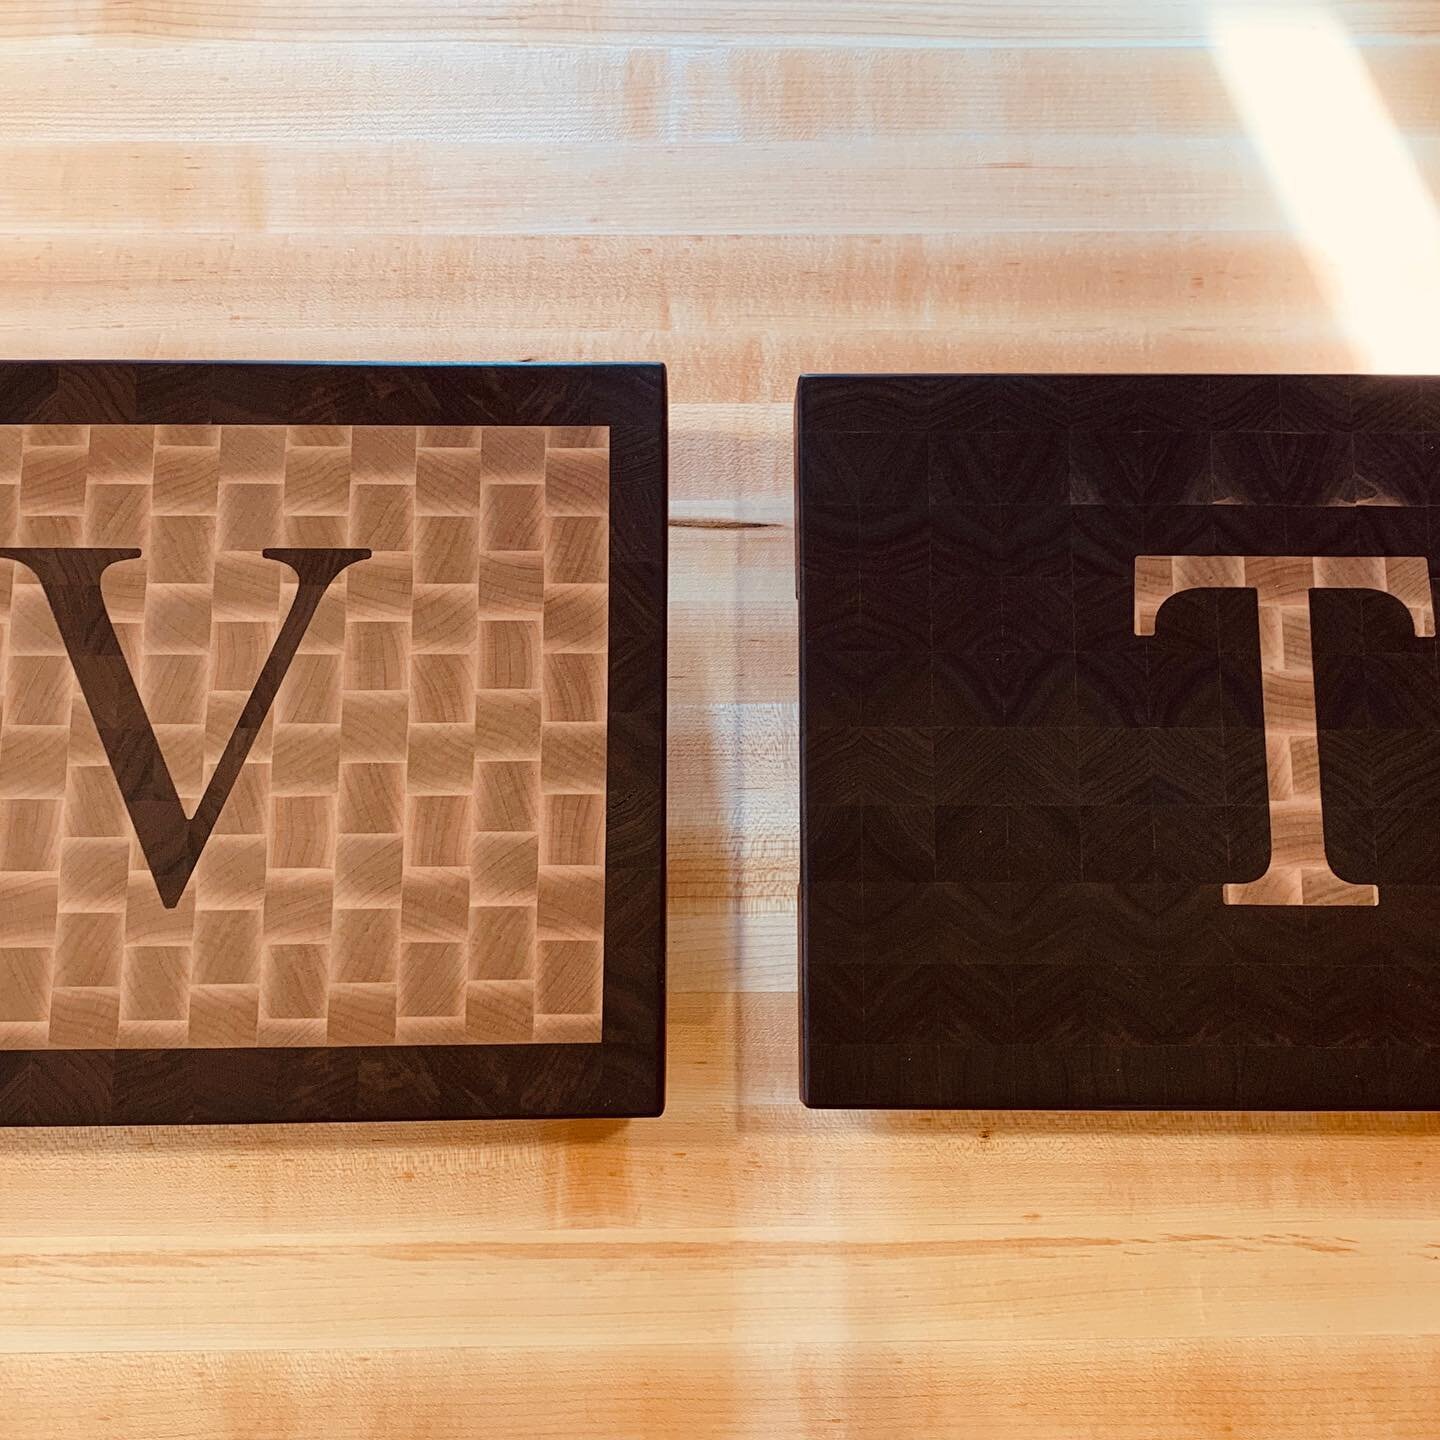 These two End grain cutting boards are ready for delivery. Thanks @buildingcharactervt for helping out with the beautiful inlays cut by your awesome CNC!